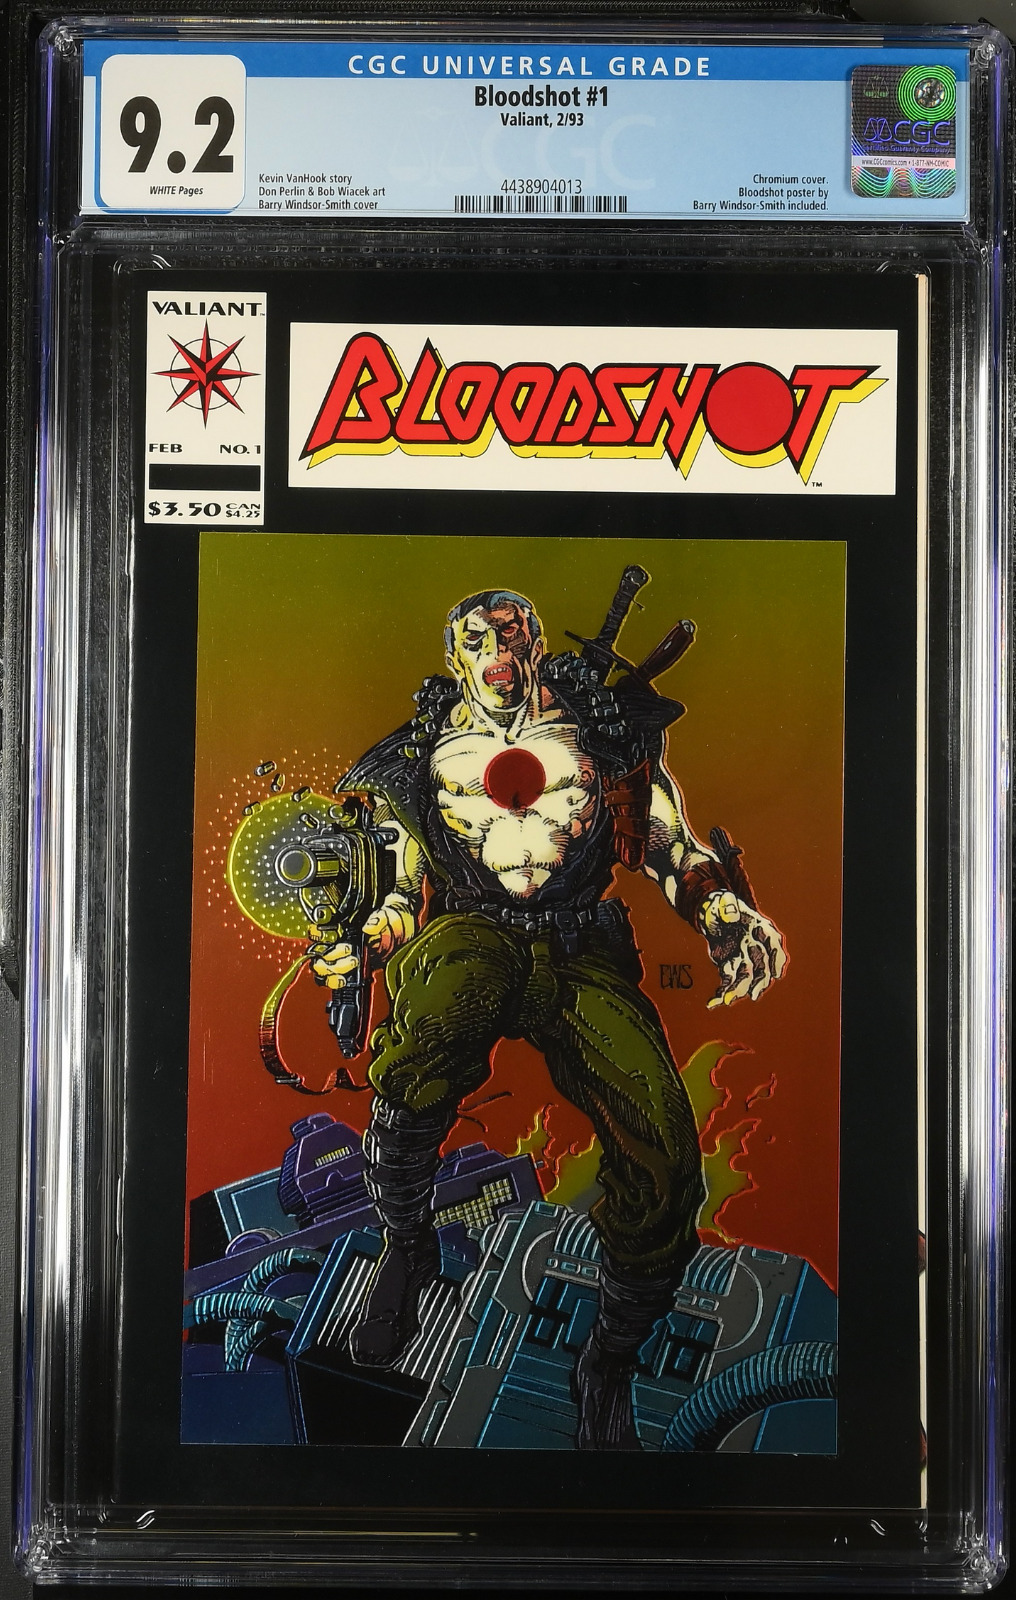 Bloodshot #1, CGC 9.2, New Slab White Pages Chromium Cover 